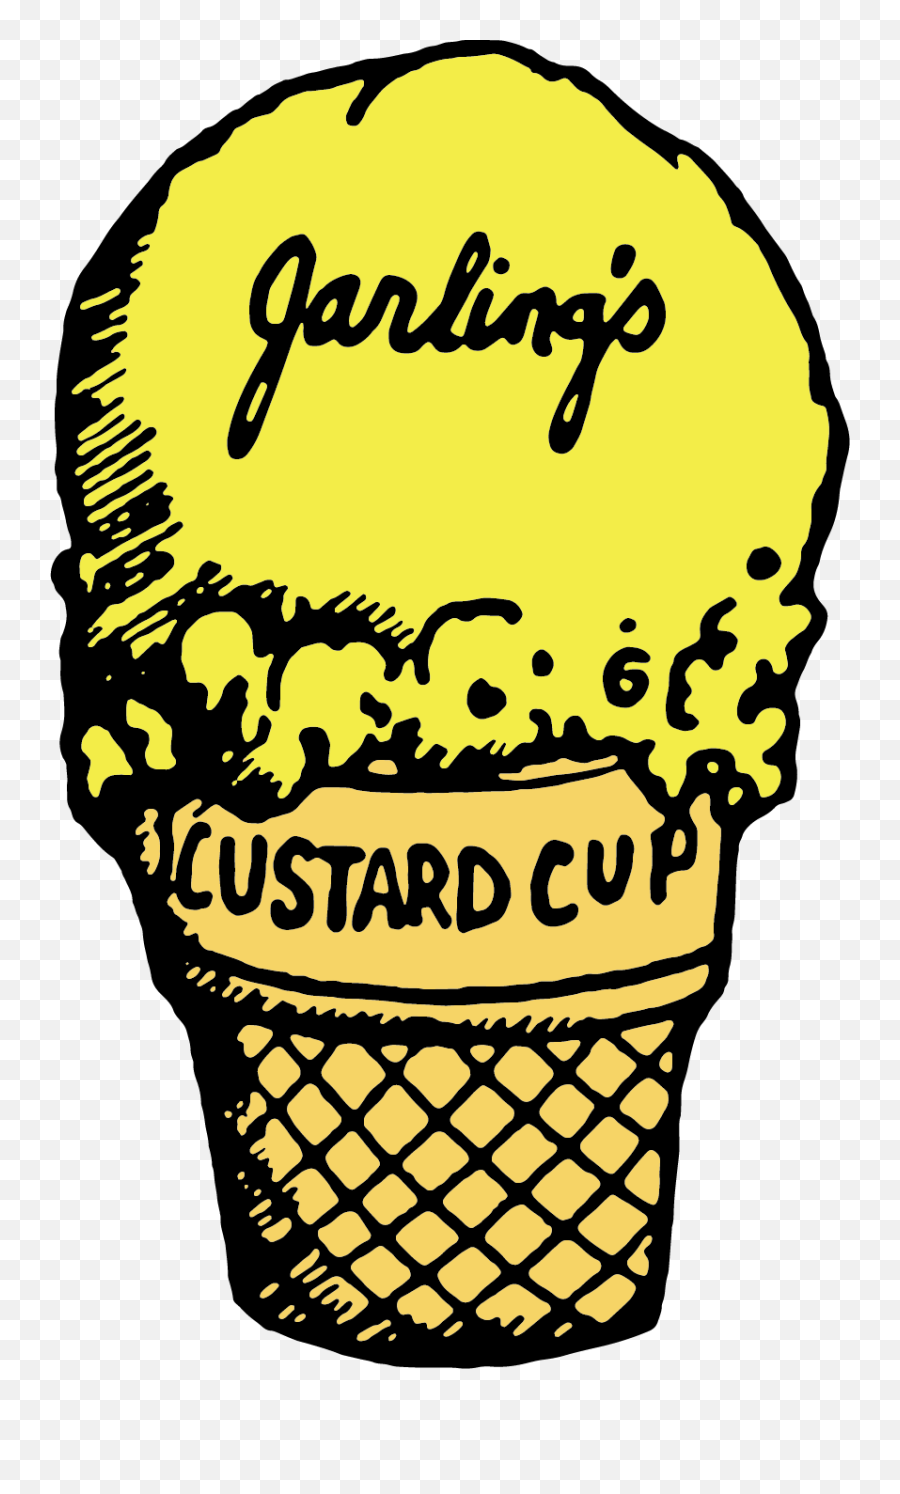 Champaign Business Named One Of Best - Jarlings Custard Cup Logo Emoji,List Of Emoticons For Facebook 2015